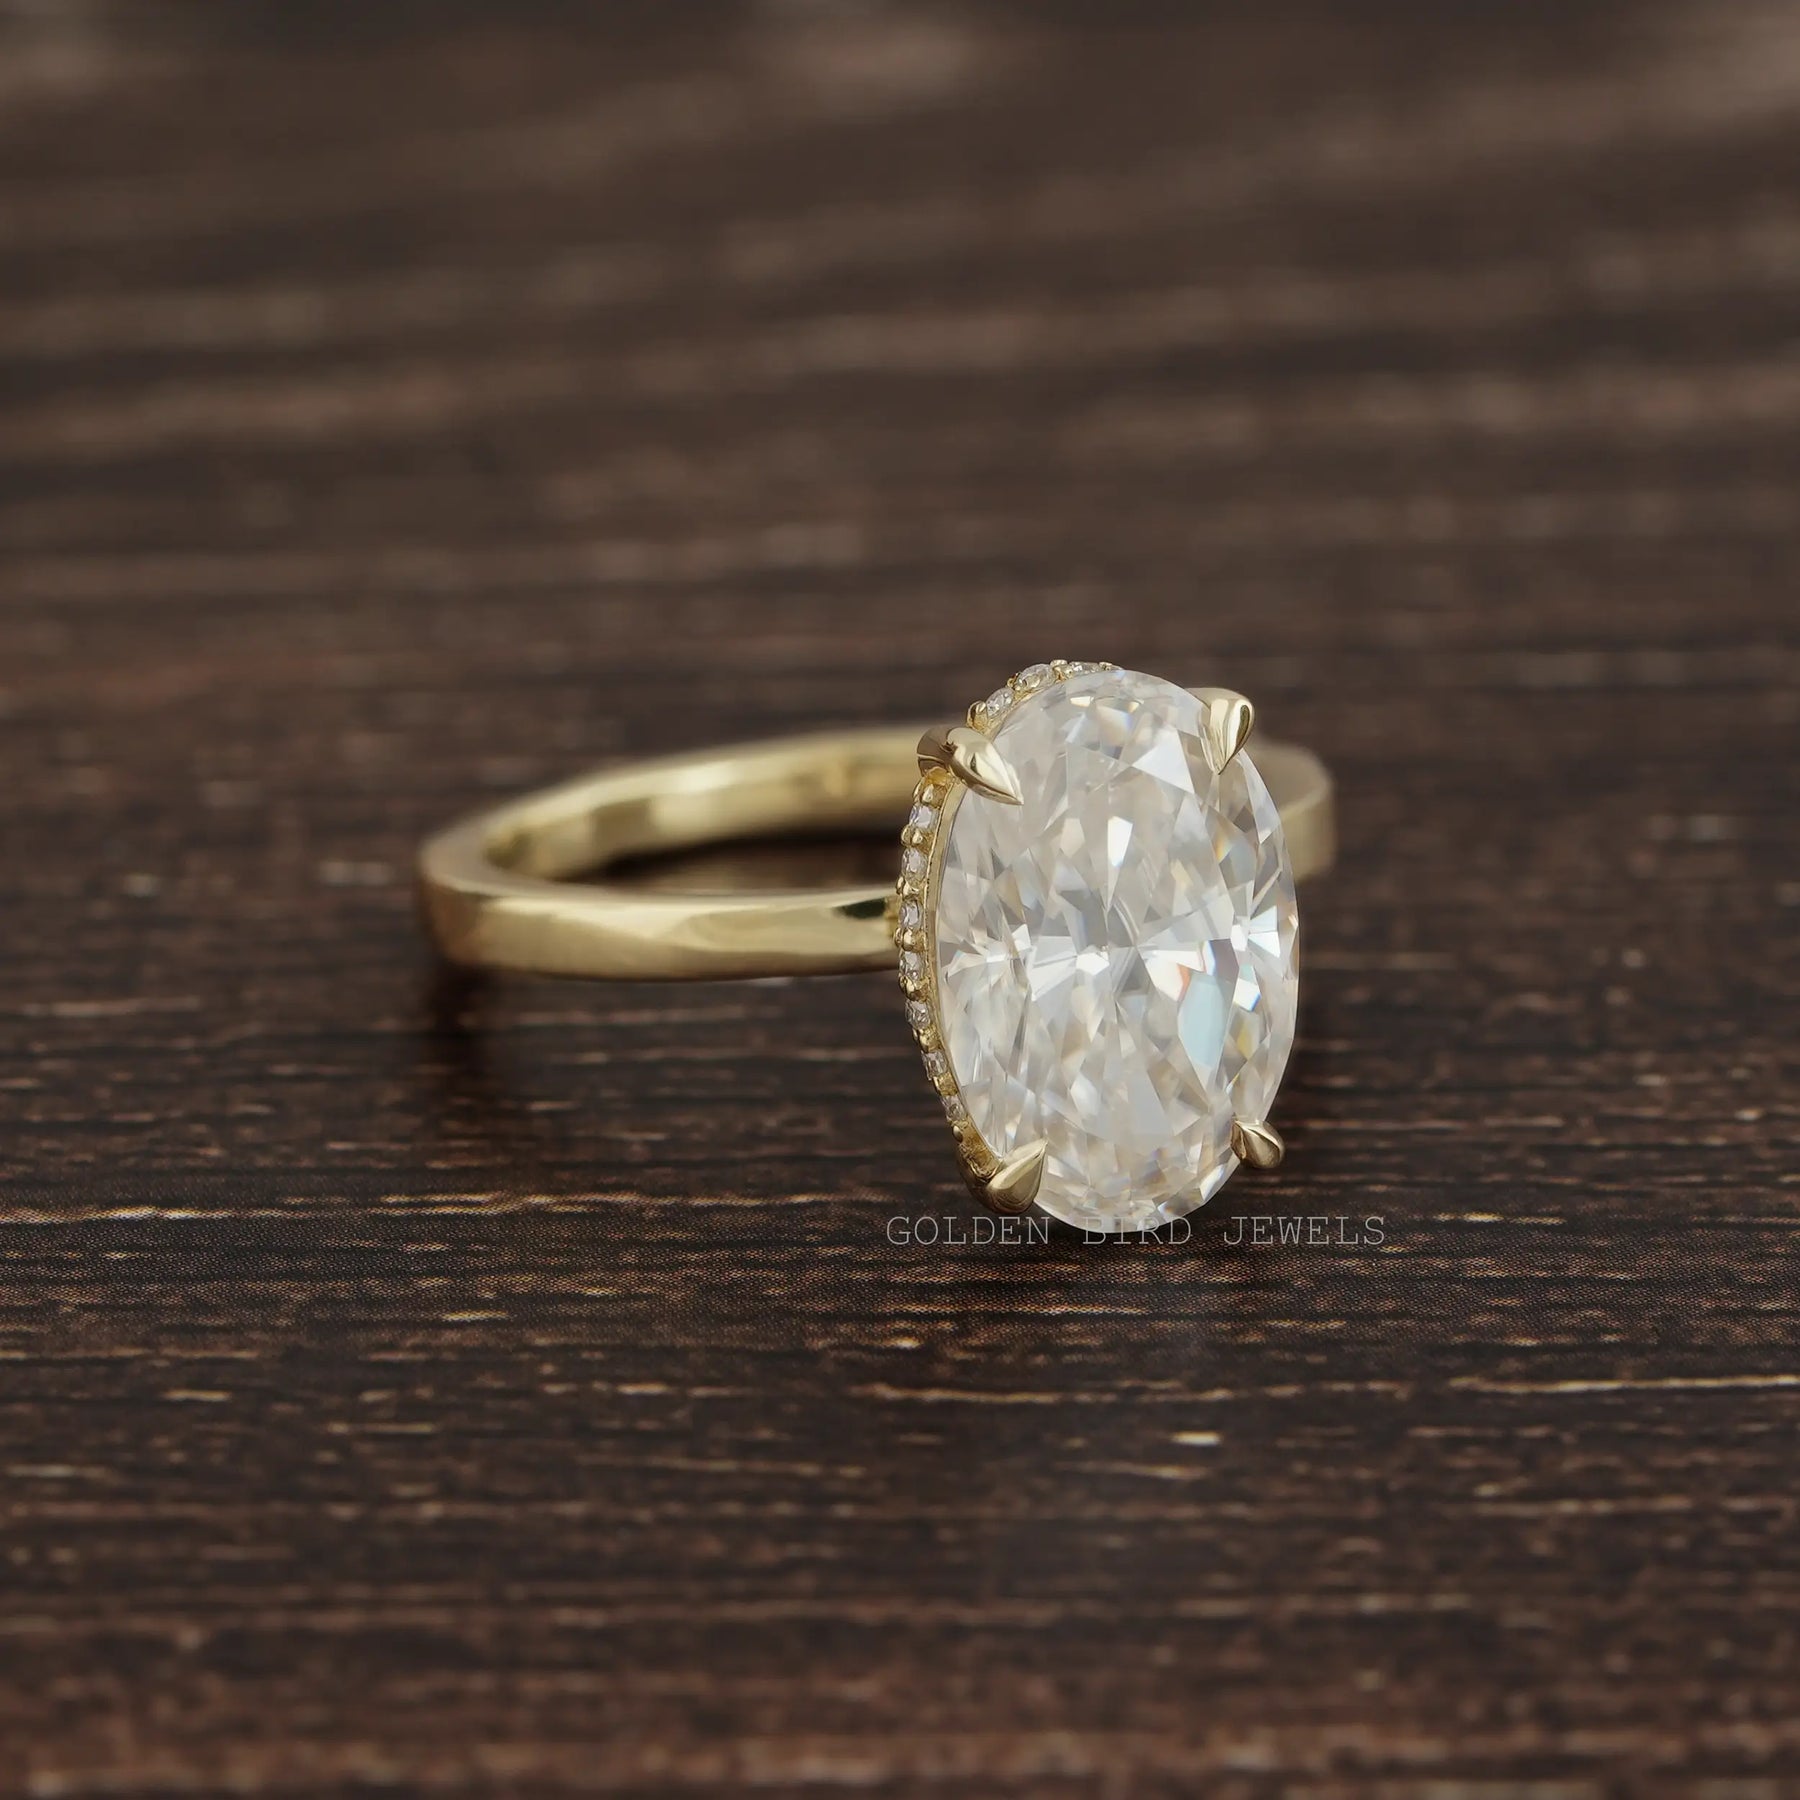 [Moissanite Crushed Ice Oval Hidden Halo Engagement Ring In 14k Yellow Gold]-[Golden Bird Jewels]